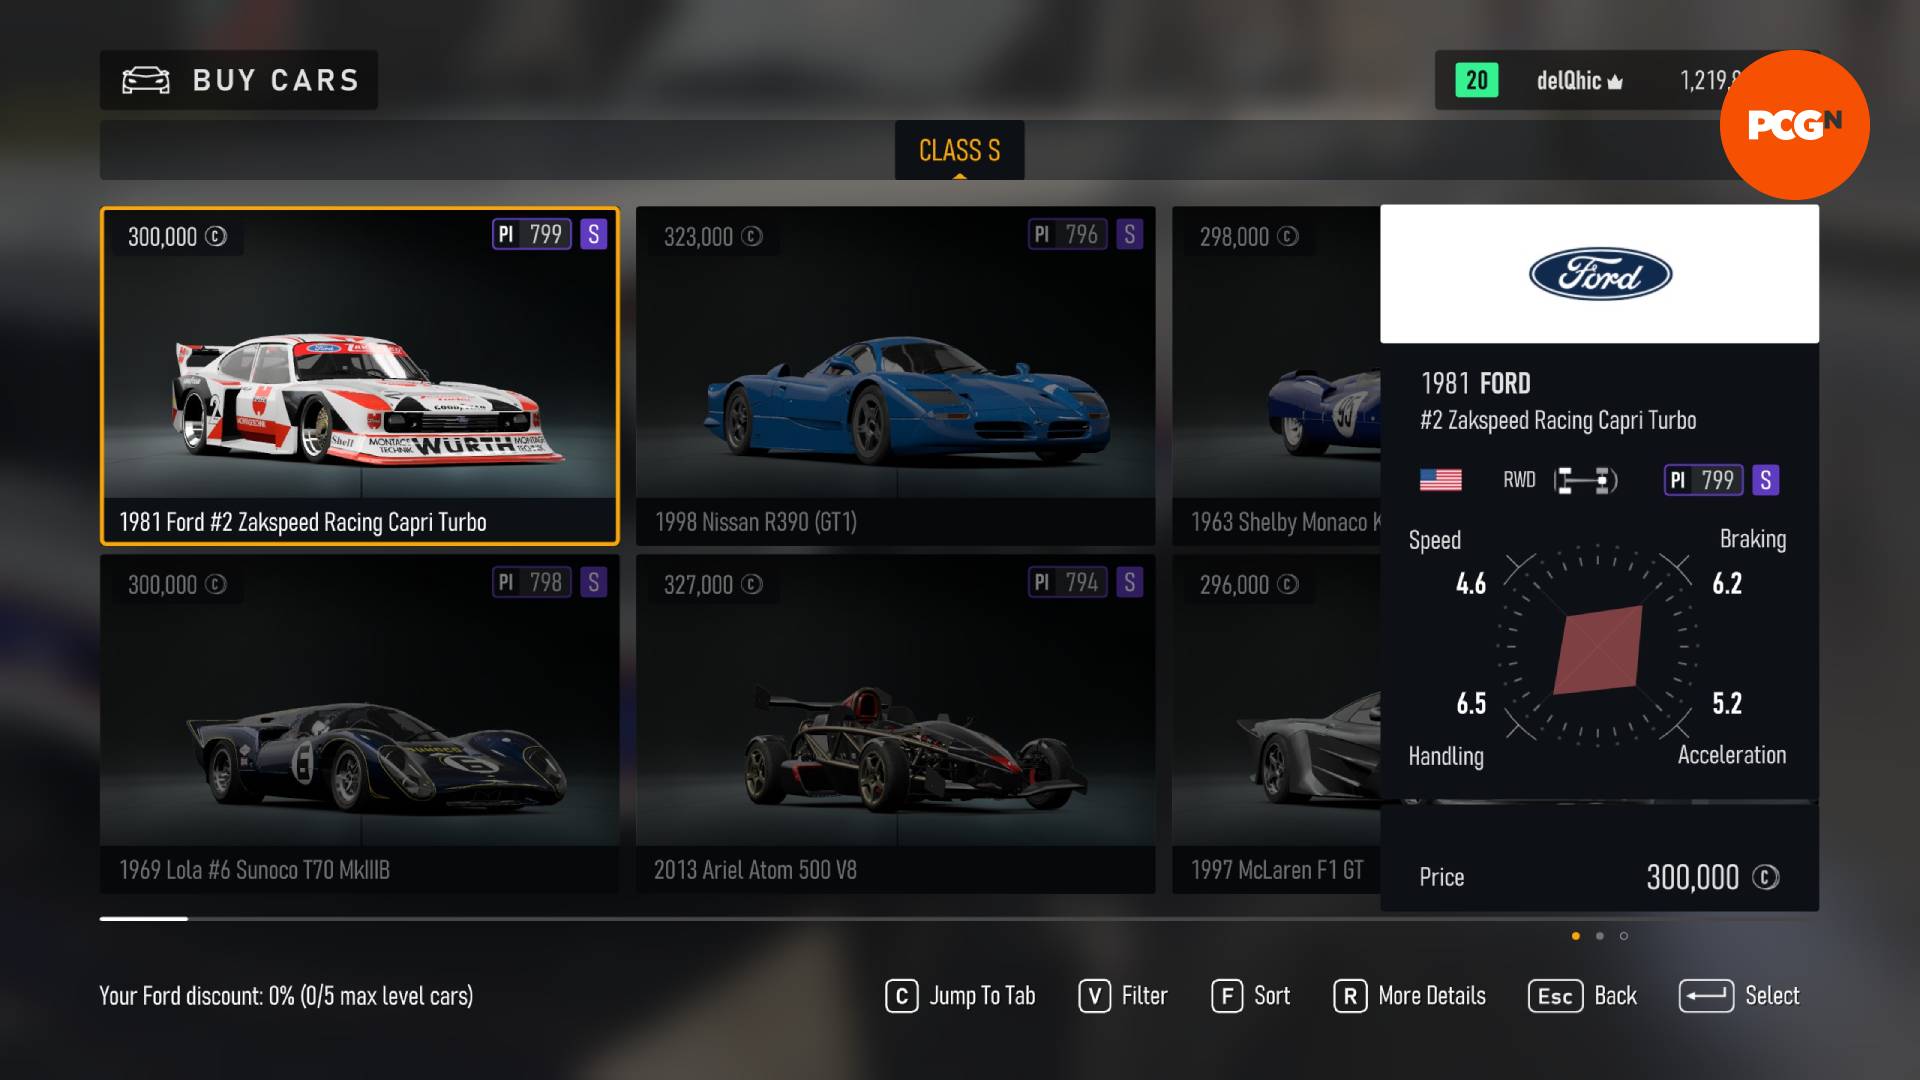 How to get free and premium DLC cars in Forza Motorsport 6